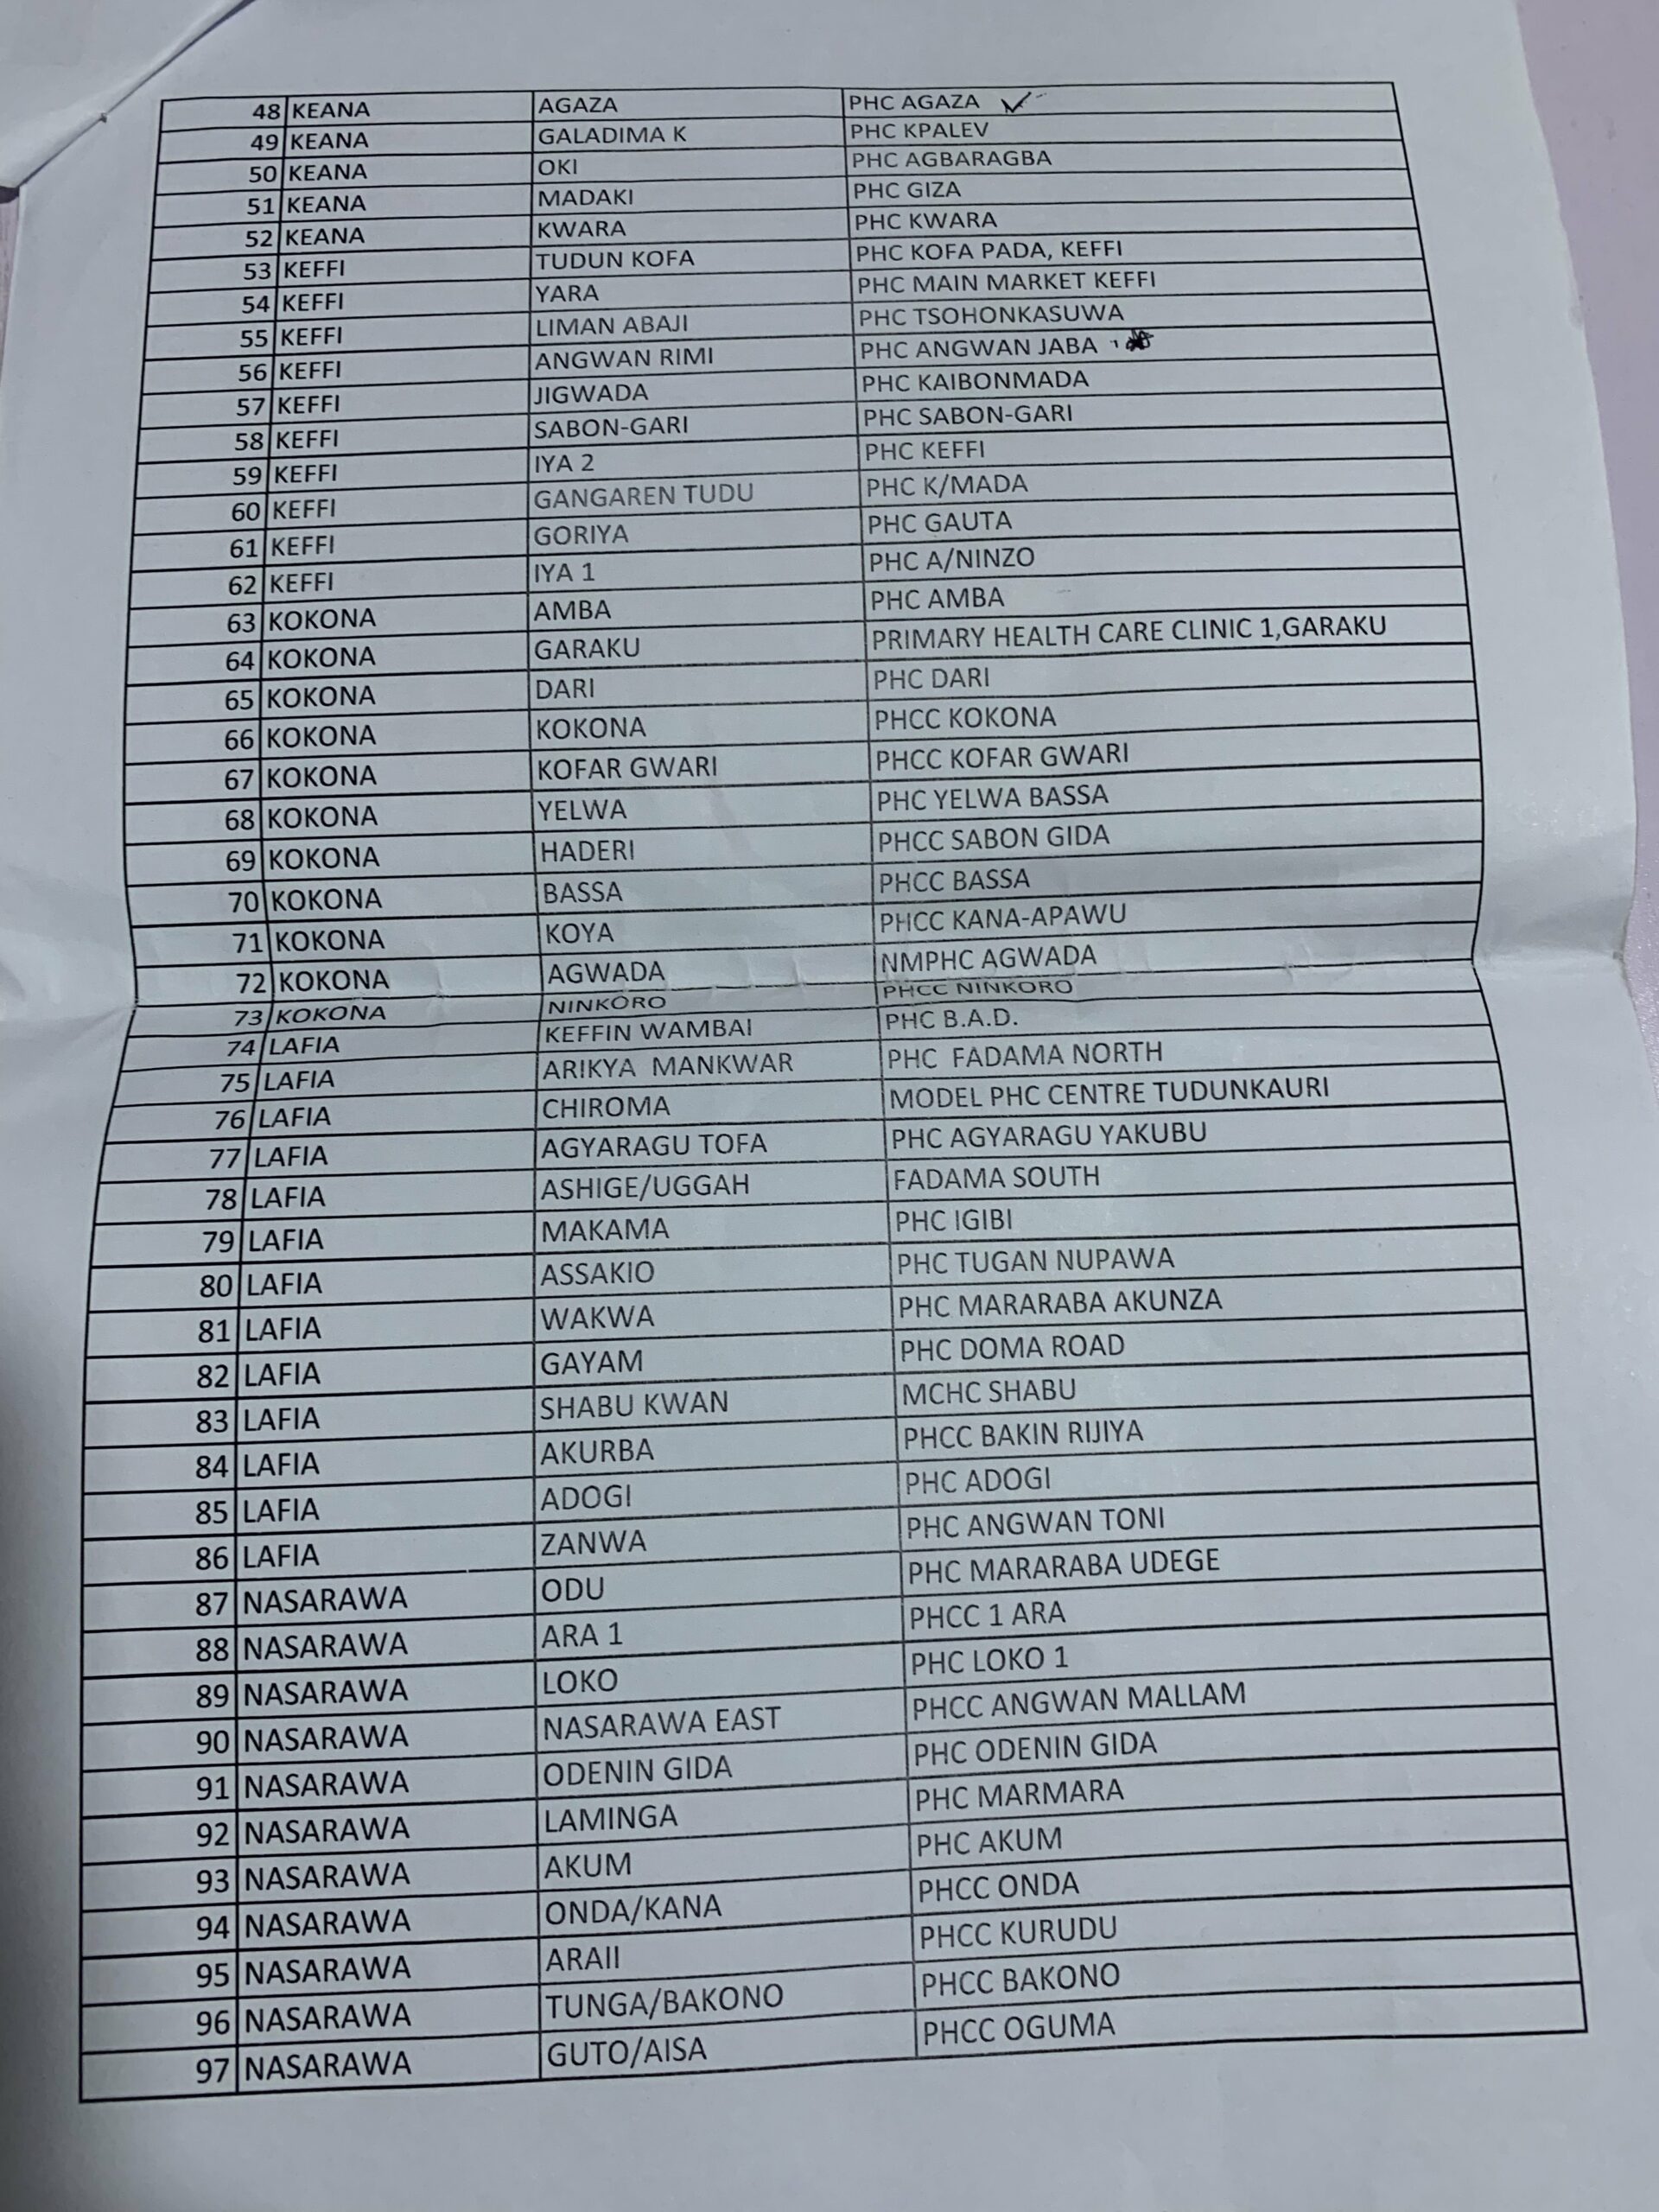 List of beneficiary PHC